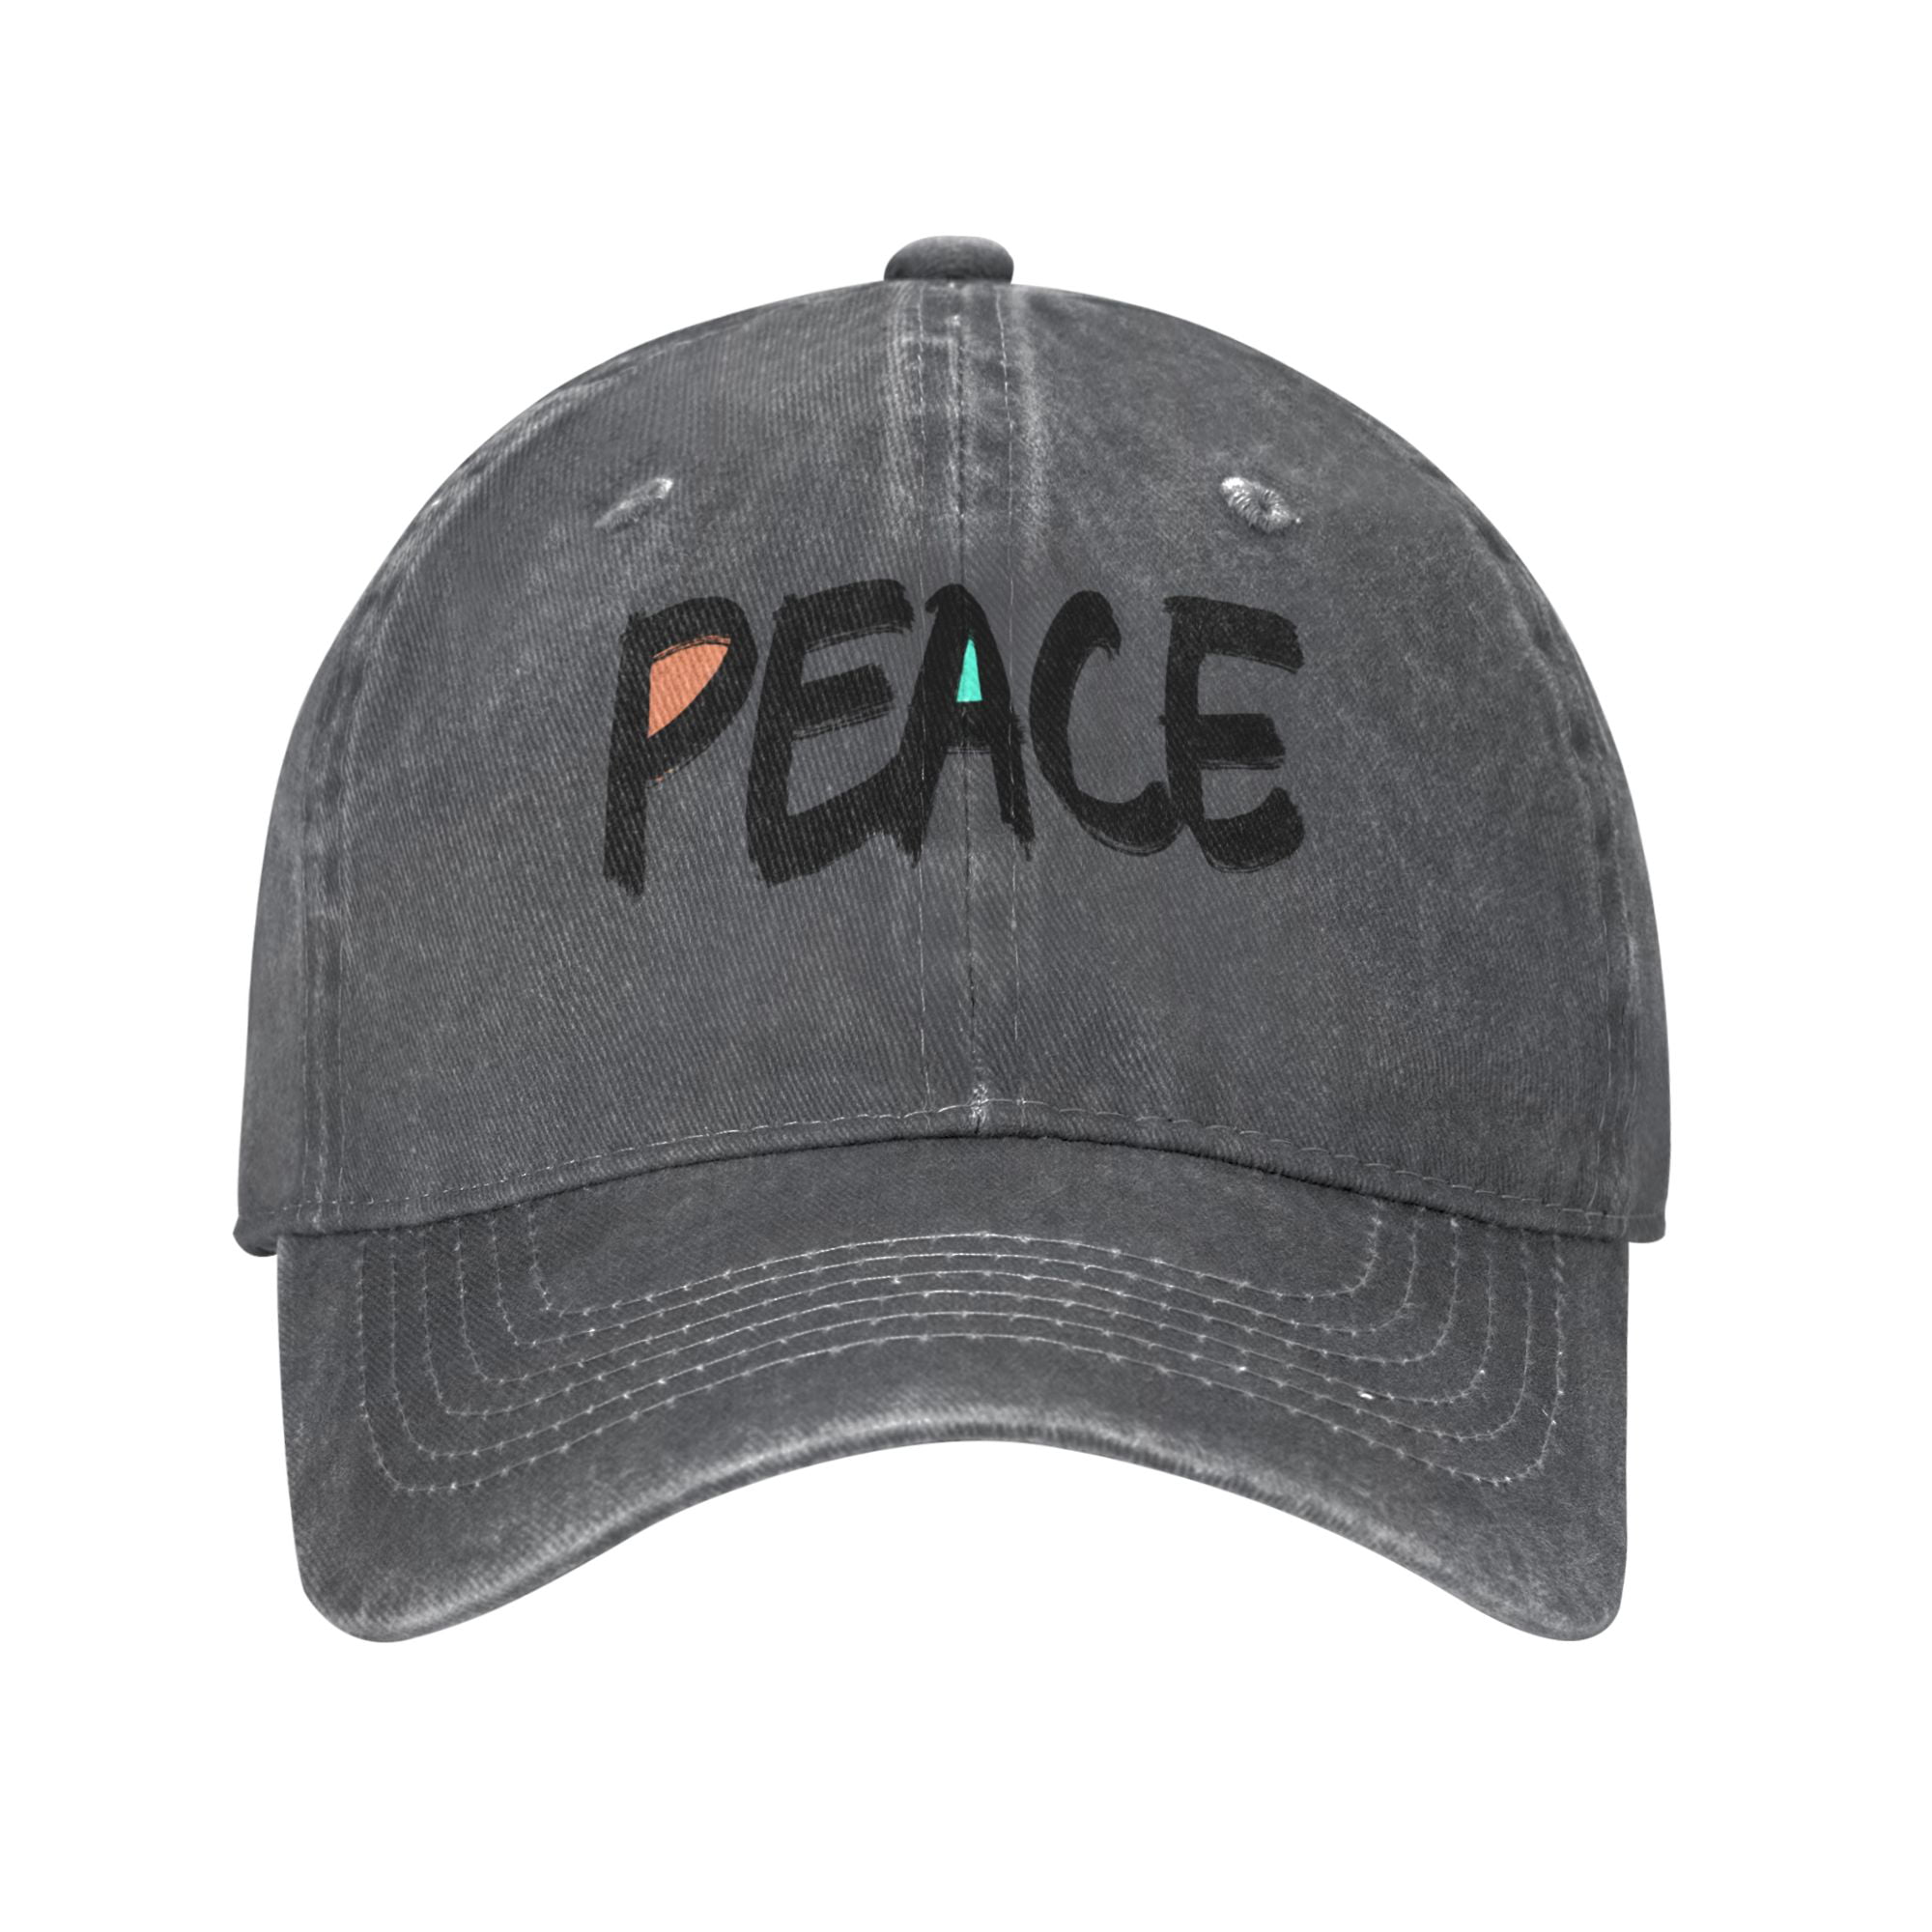 ZICANCN Unisex Baseball Cap with Peace Letters - Low Guinea